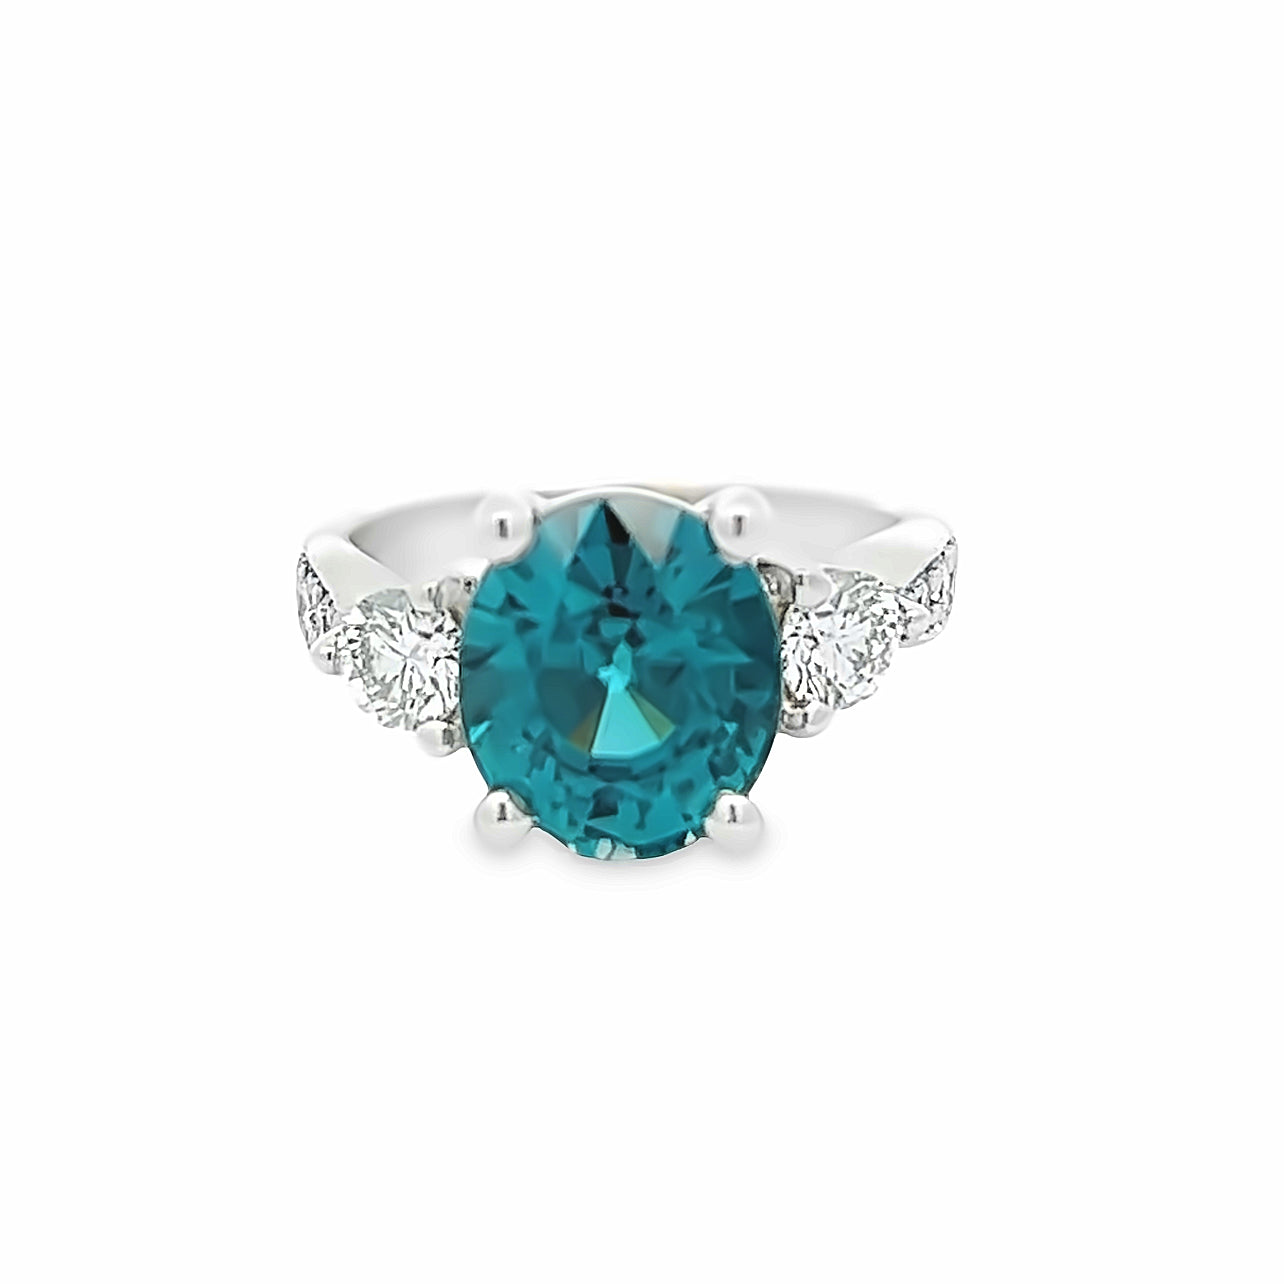 14k White Gold Oval Blue Zircon and Round Diamond Ring (6.11ct.)